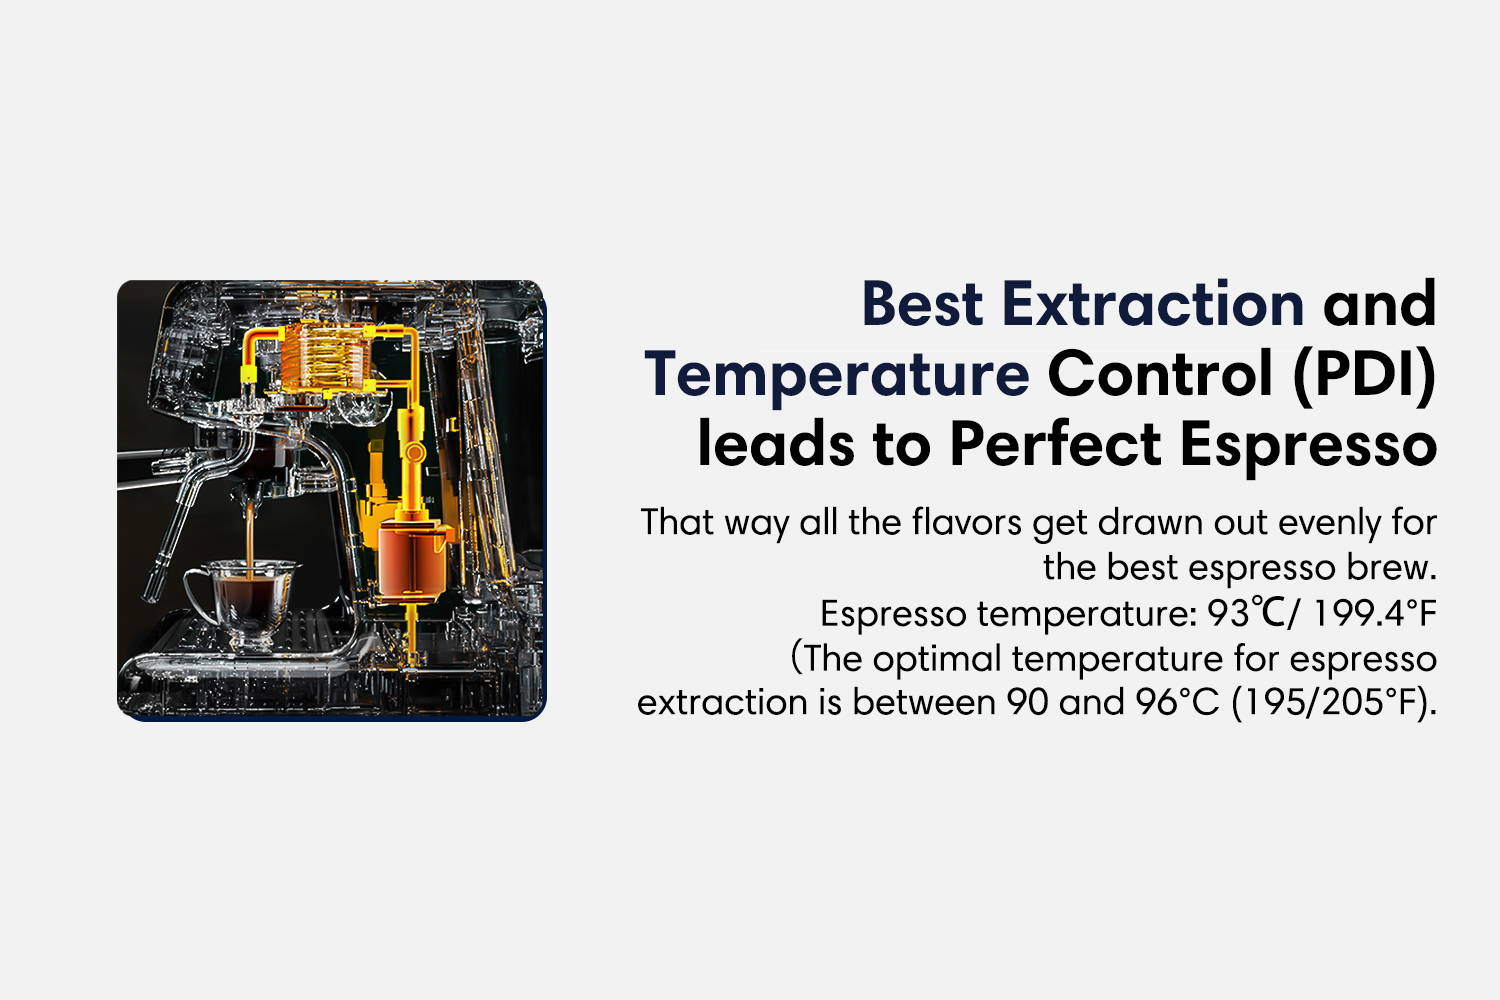 best extraction and temperature control leads to perfect espresso 20 bar quality Italian pump and PDI delivers water at precisely right temperature, ensuring quick and perfect espresso extraction.